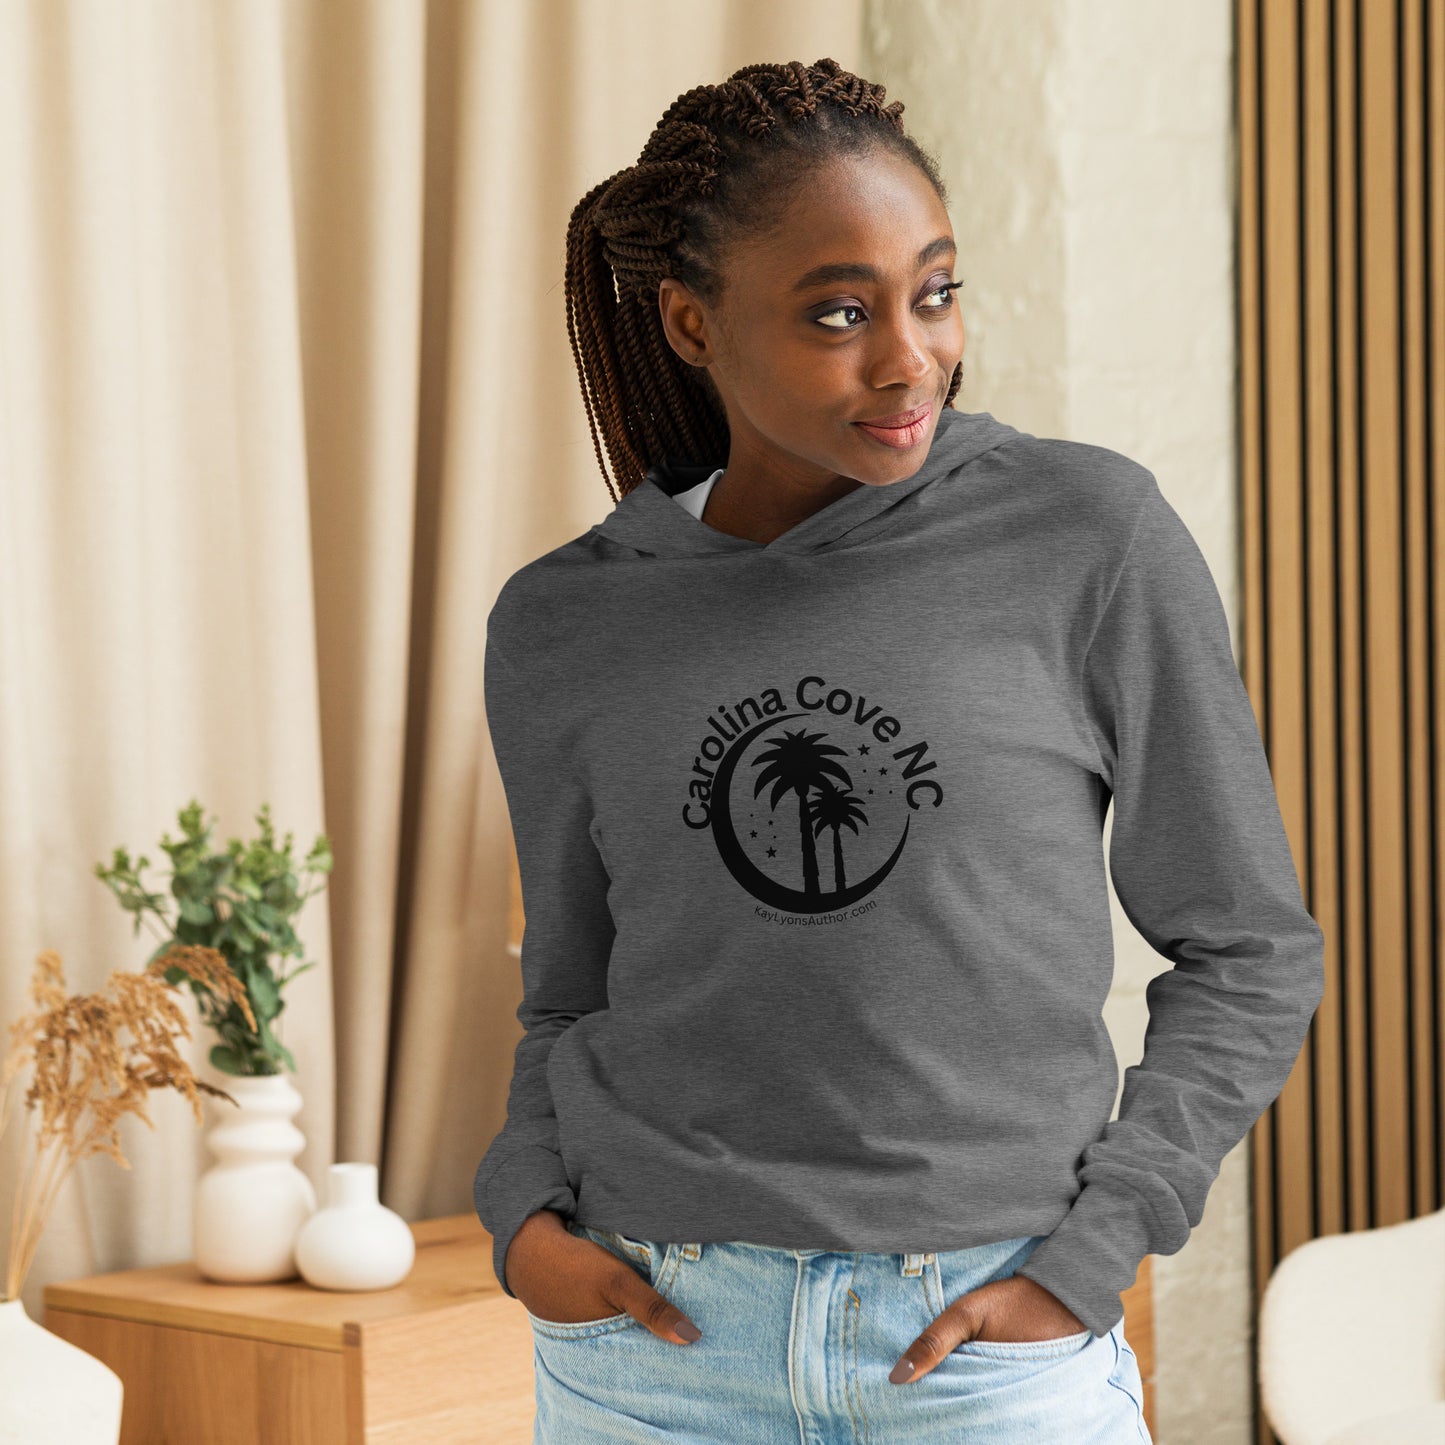 Hooded long-sleeve tee - FEATURING OUR FAVORITE FICTIONAL TOWN CAROLINA COVE NC